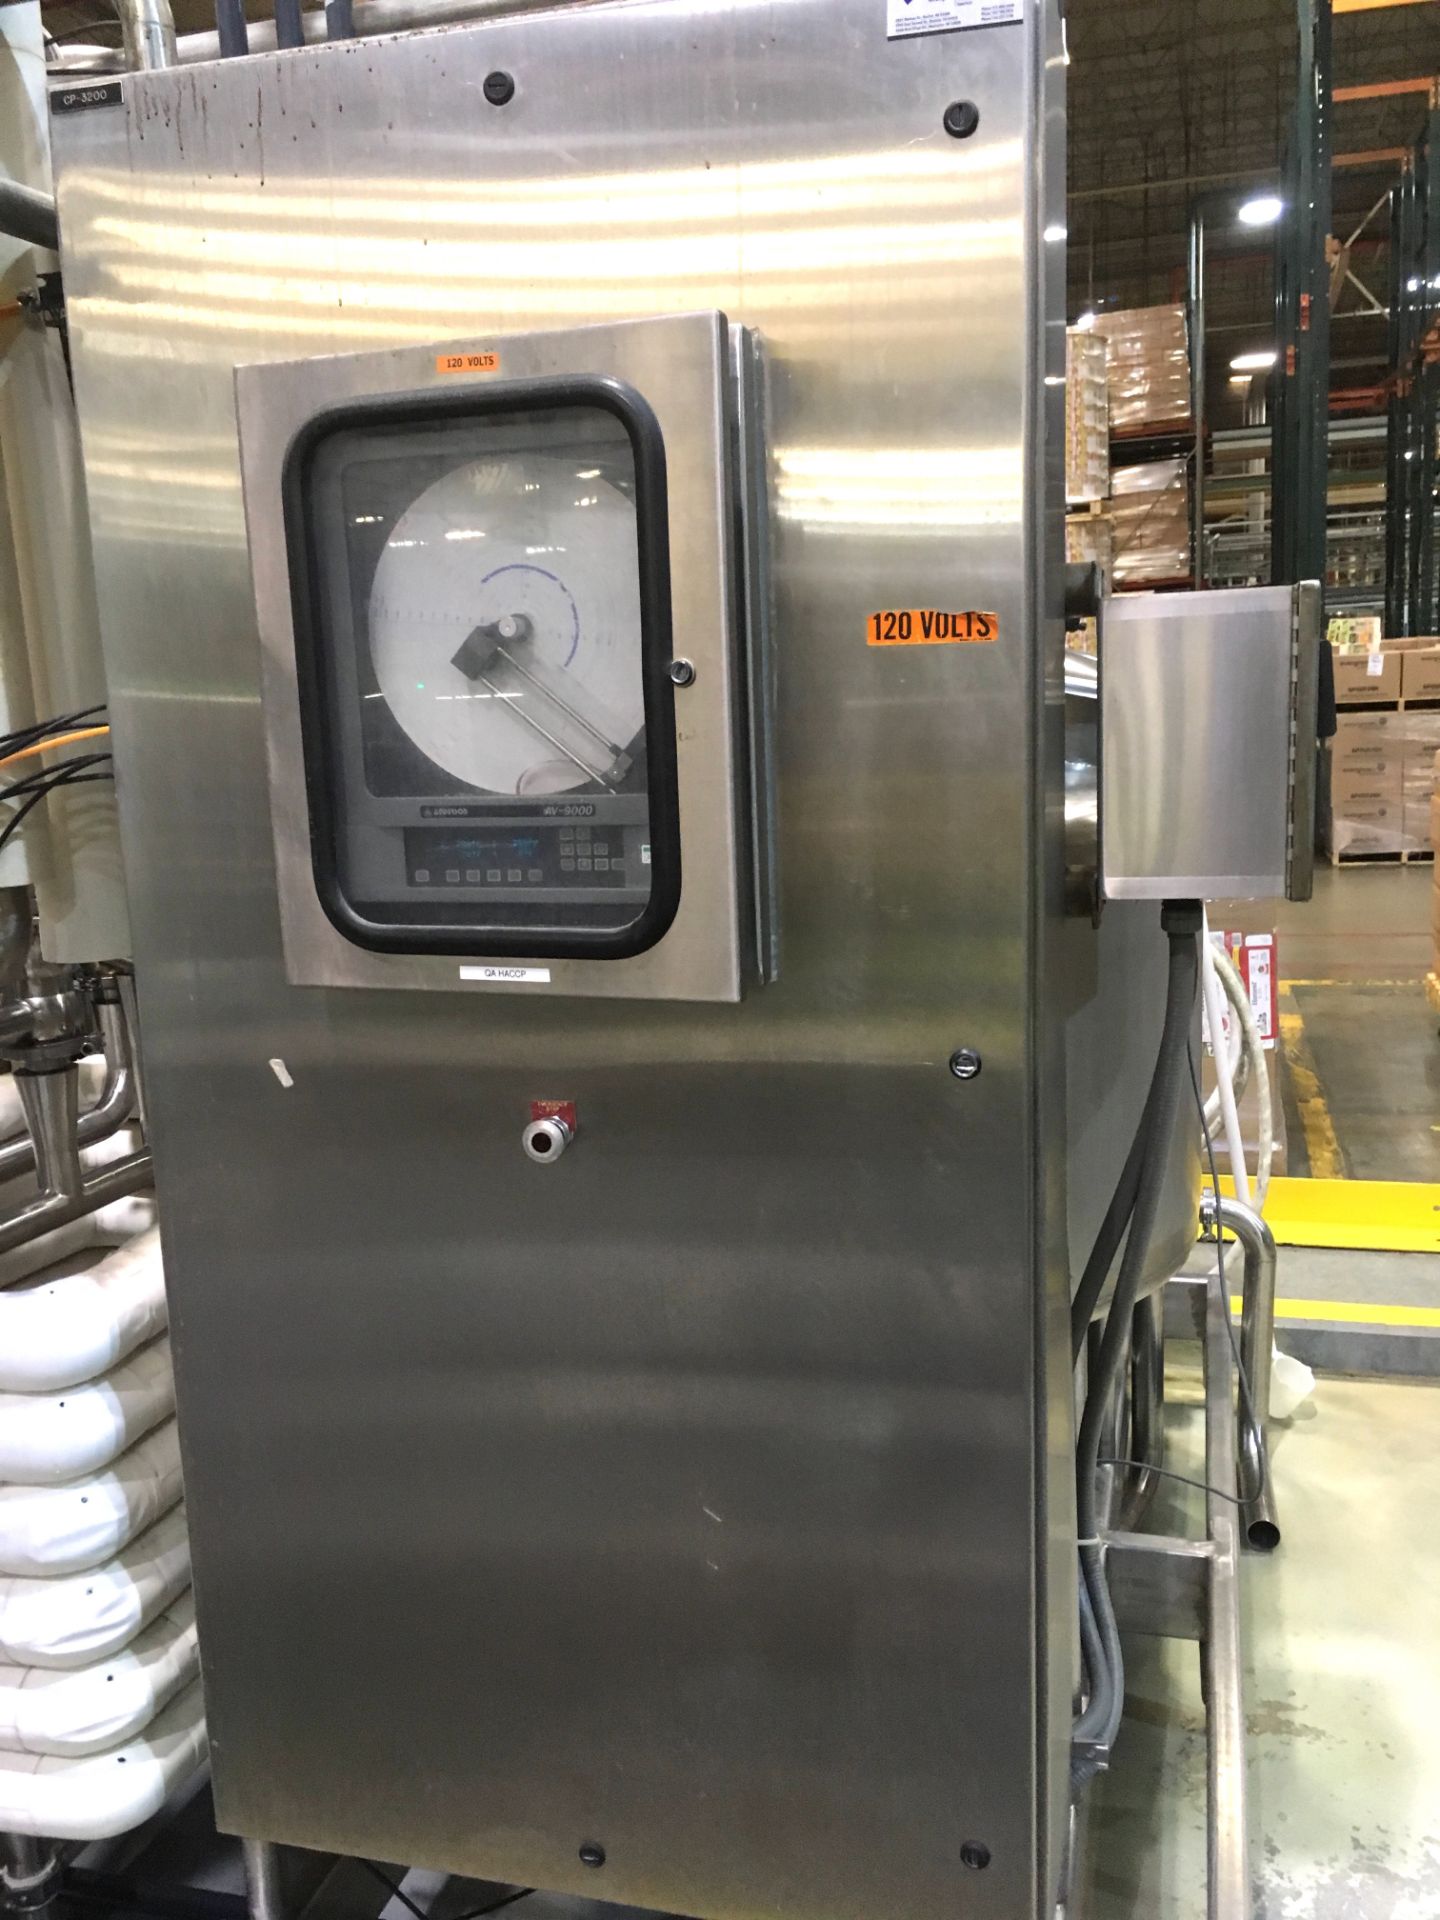 Skid Mounted HTST Pasteurization System for Hot Fill, Setup for Juice at 25 gallons per minute at - Image 5 of 14